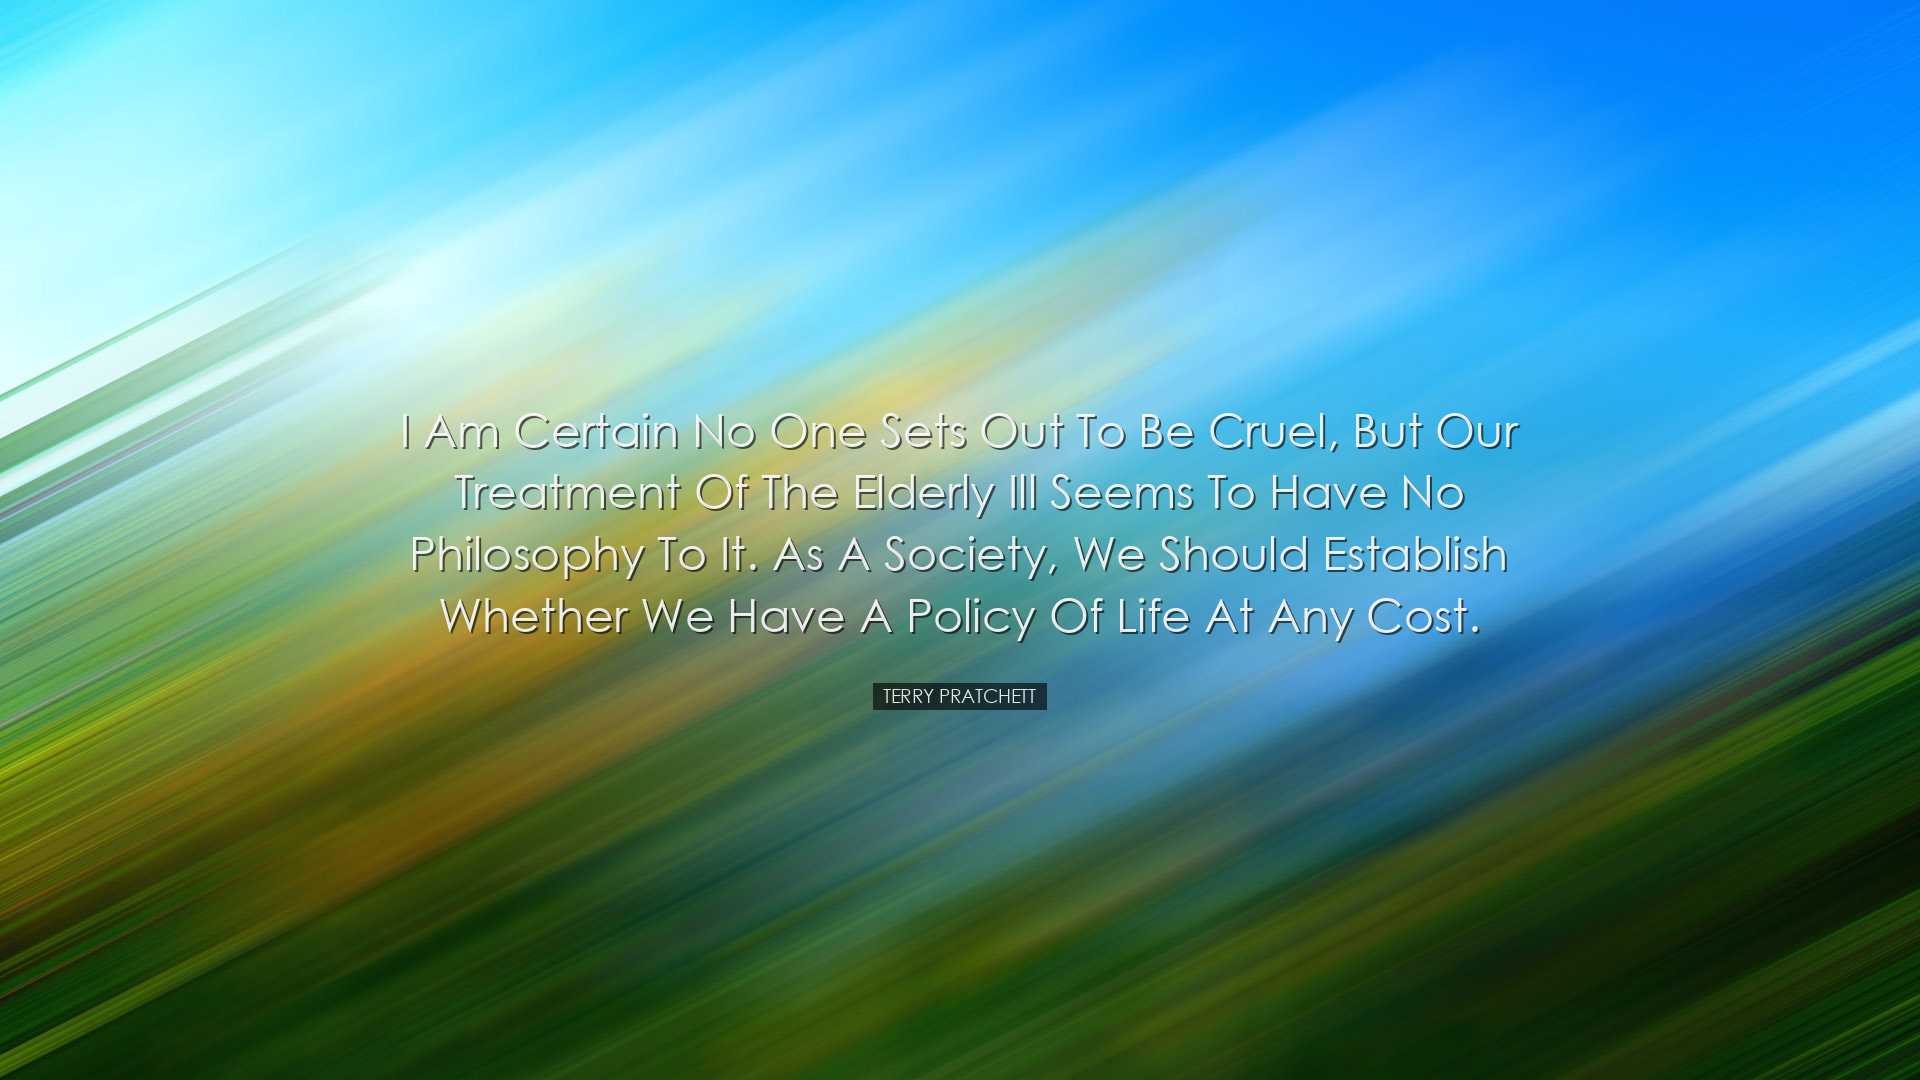 I am certain no one sets out to be cruel, but our treatment of the